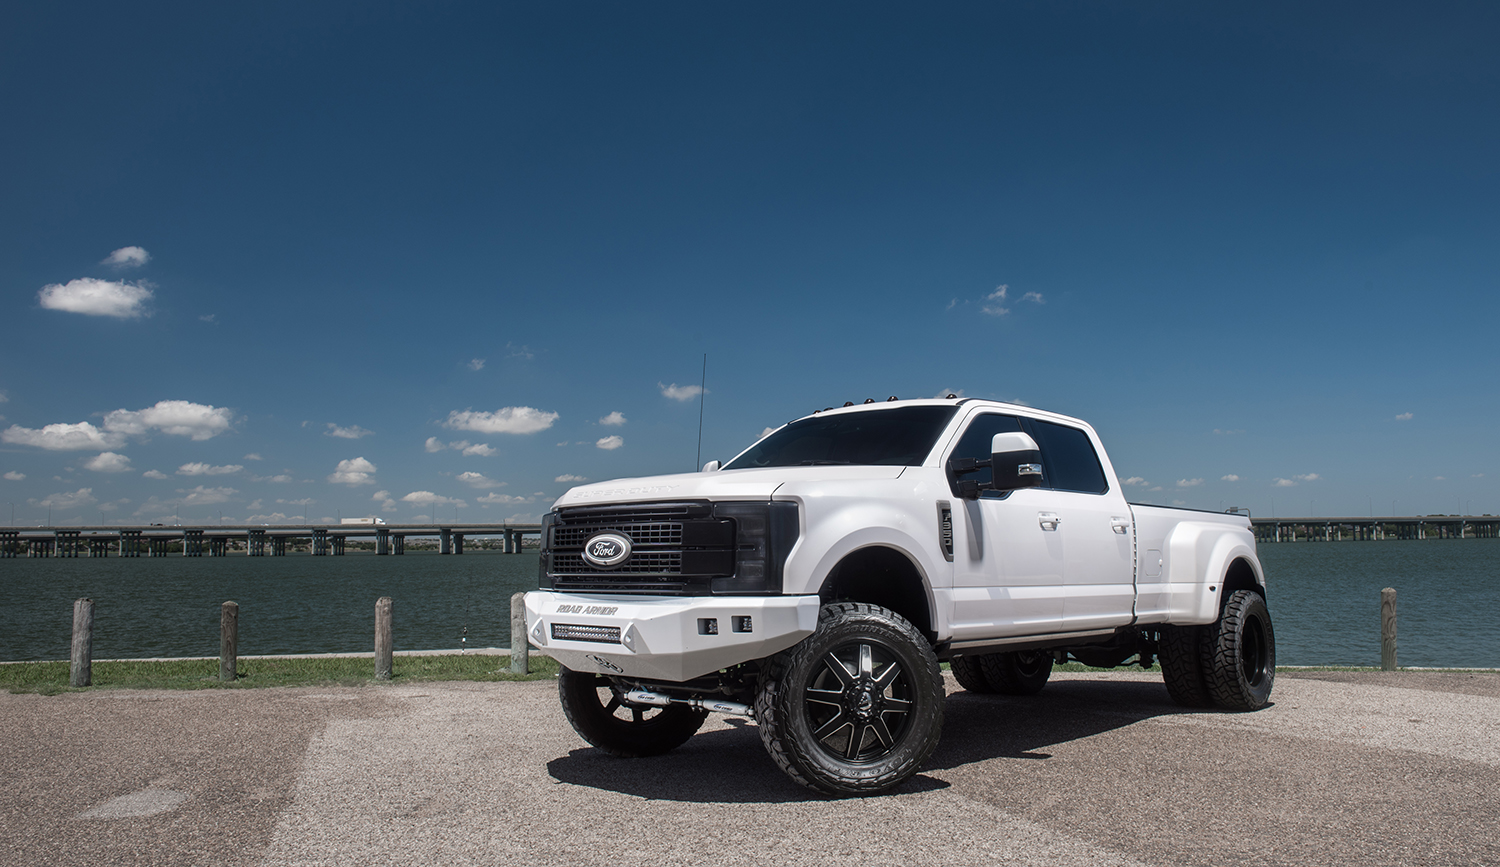 2017 Lifted 4x4 Ford F 350 Platinum Dually White Truck Build Rad